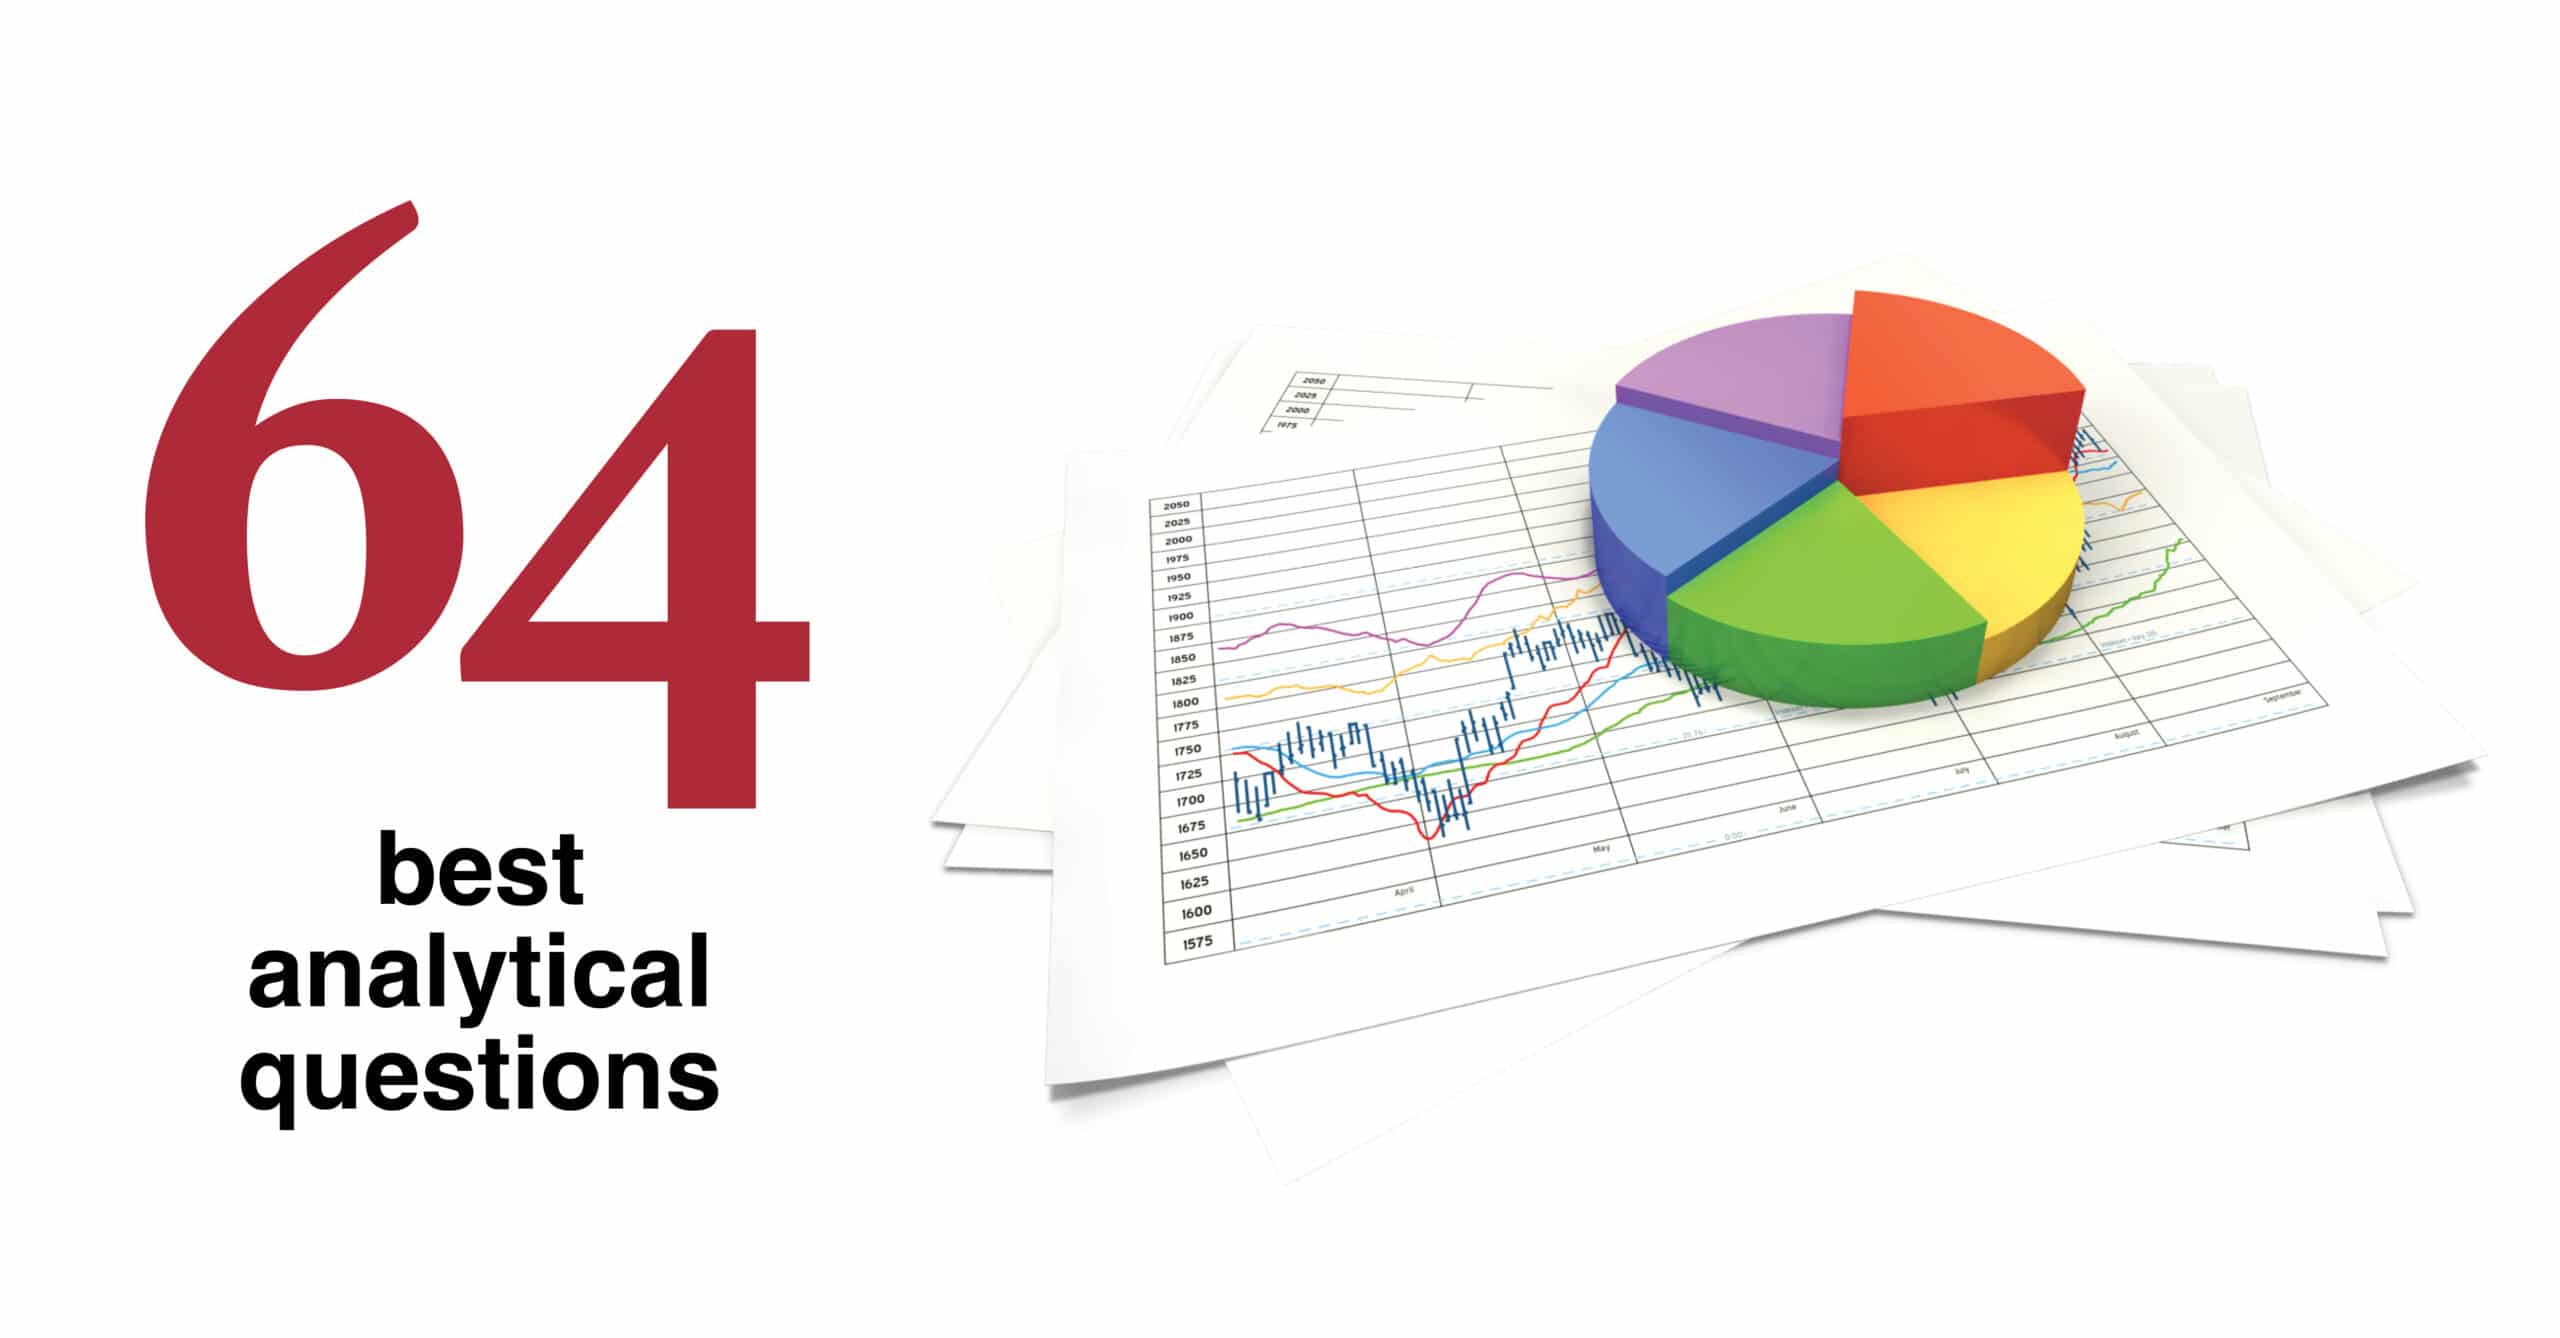 64 analytical questions for your business review